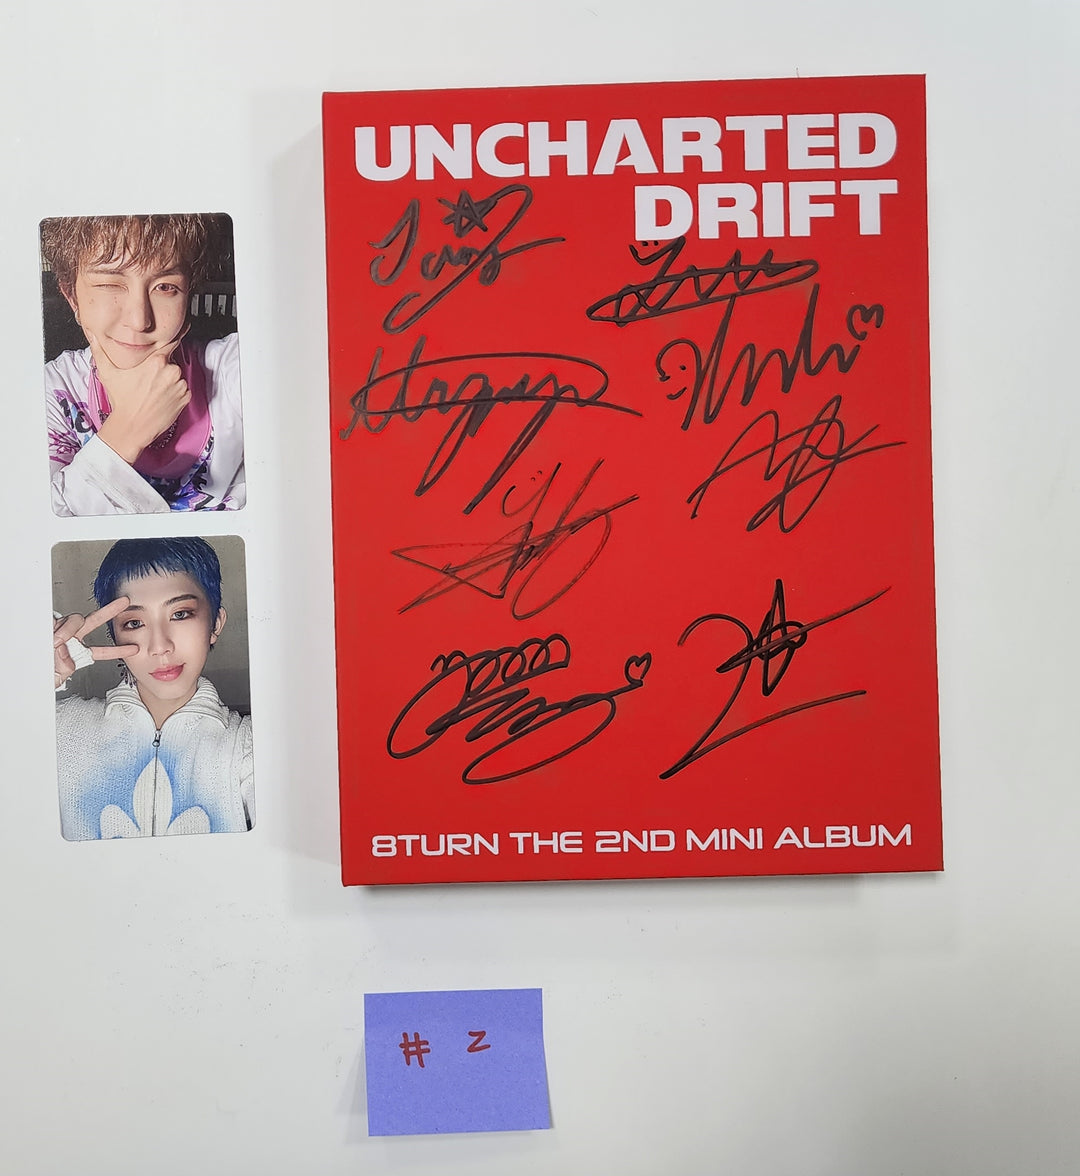 8TURN "UNCHARTED DRIFT" - Hand Autographed(Signed) Promo Album